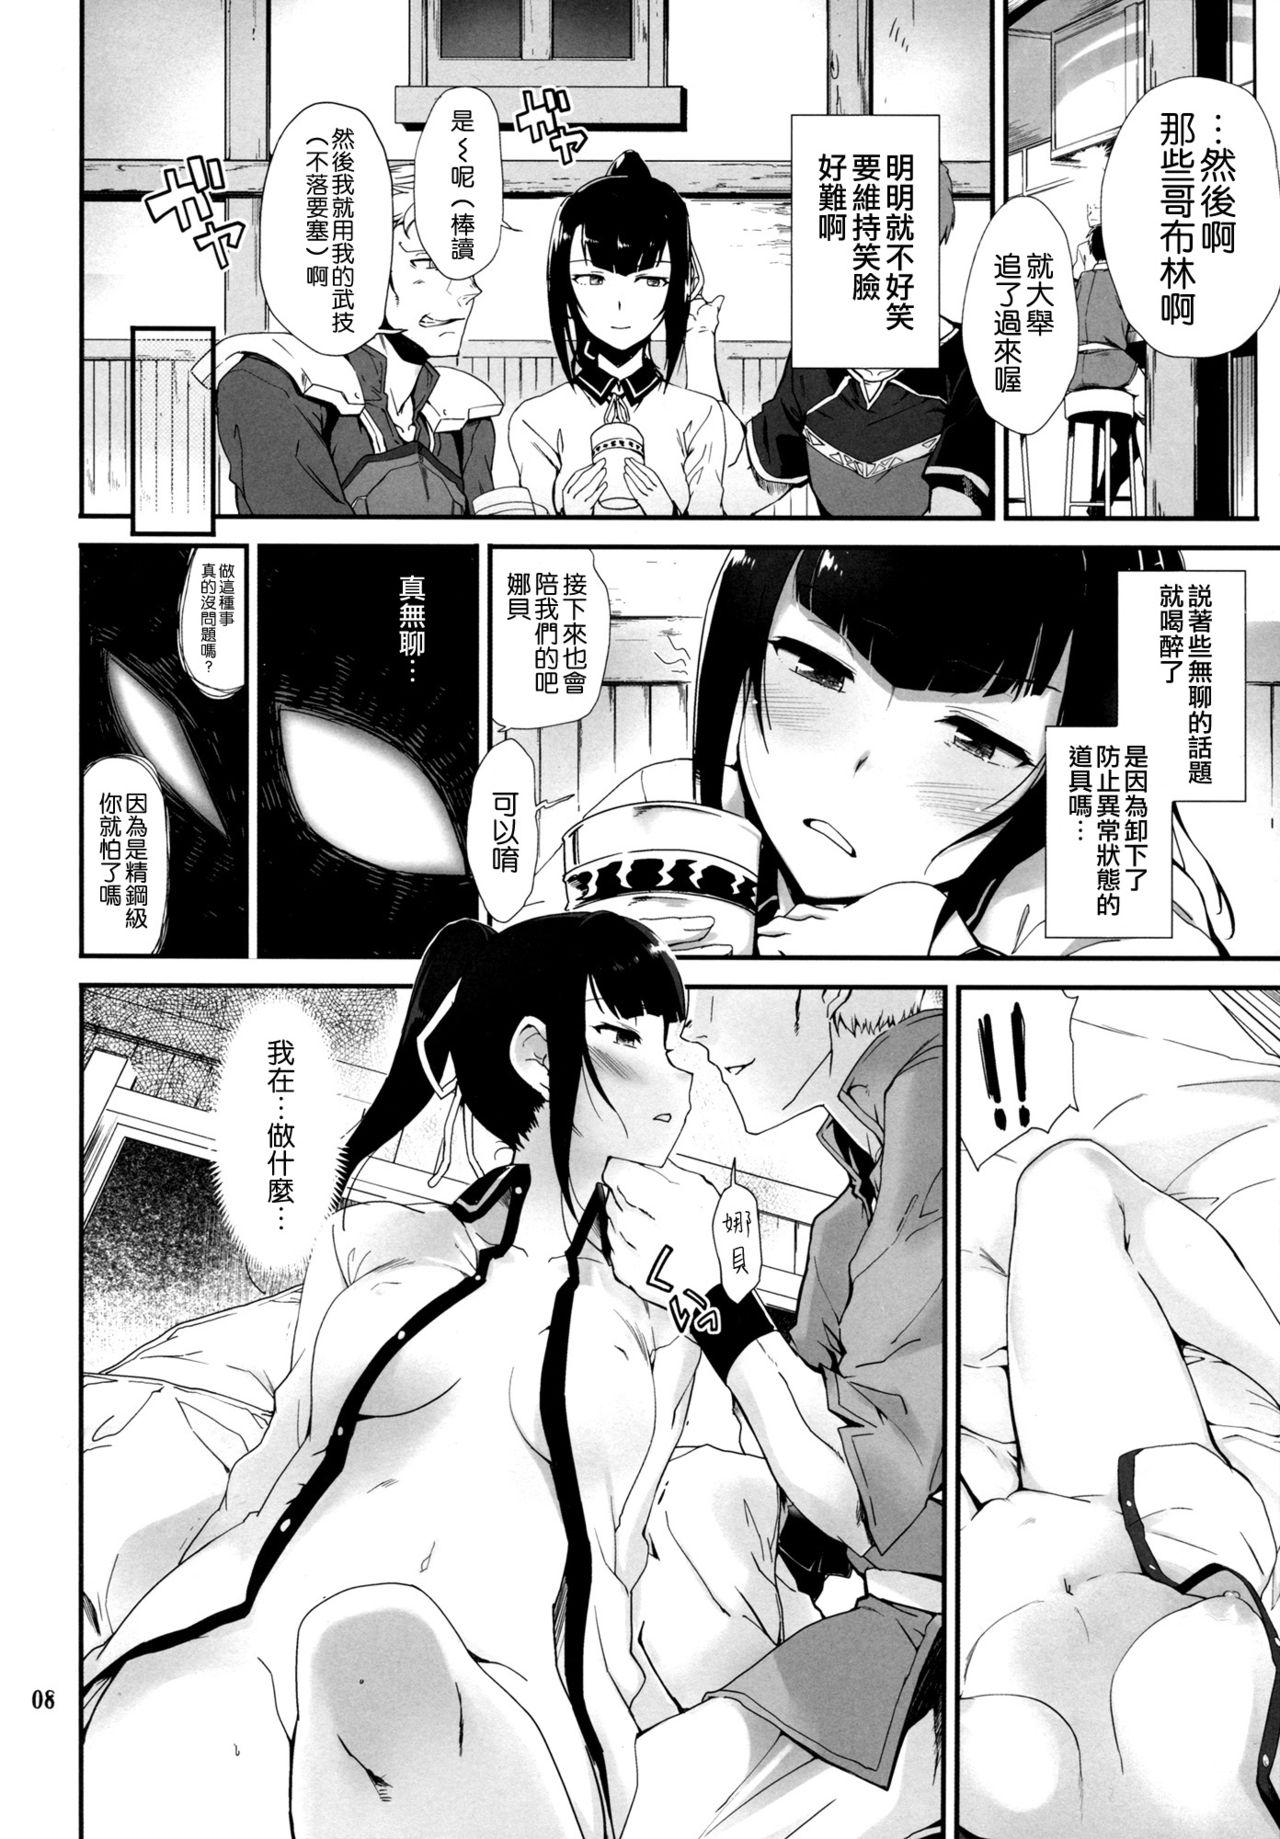 Mature Woman Narberal no Kougou - Overlord Women Fucking - Page 7